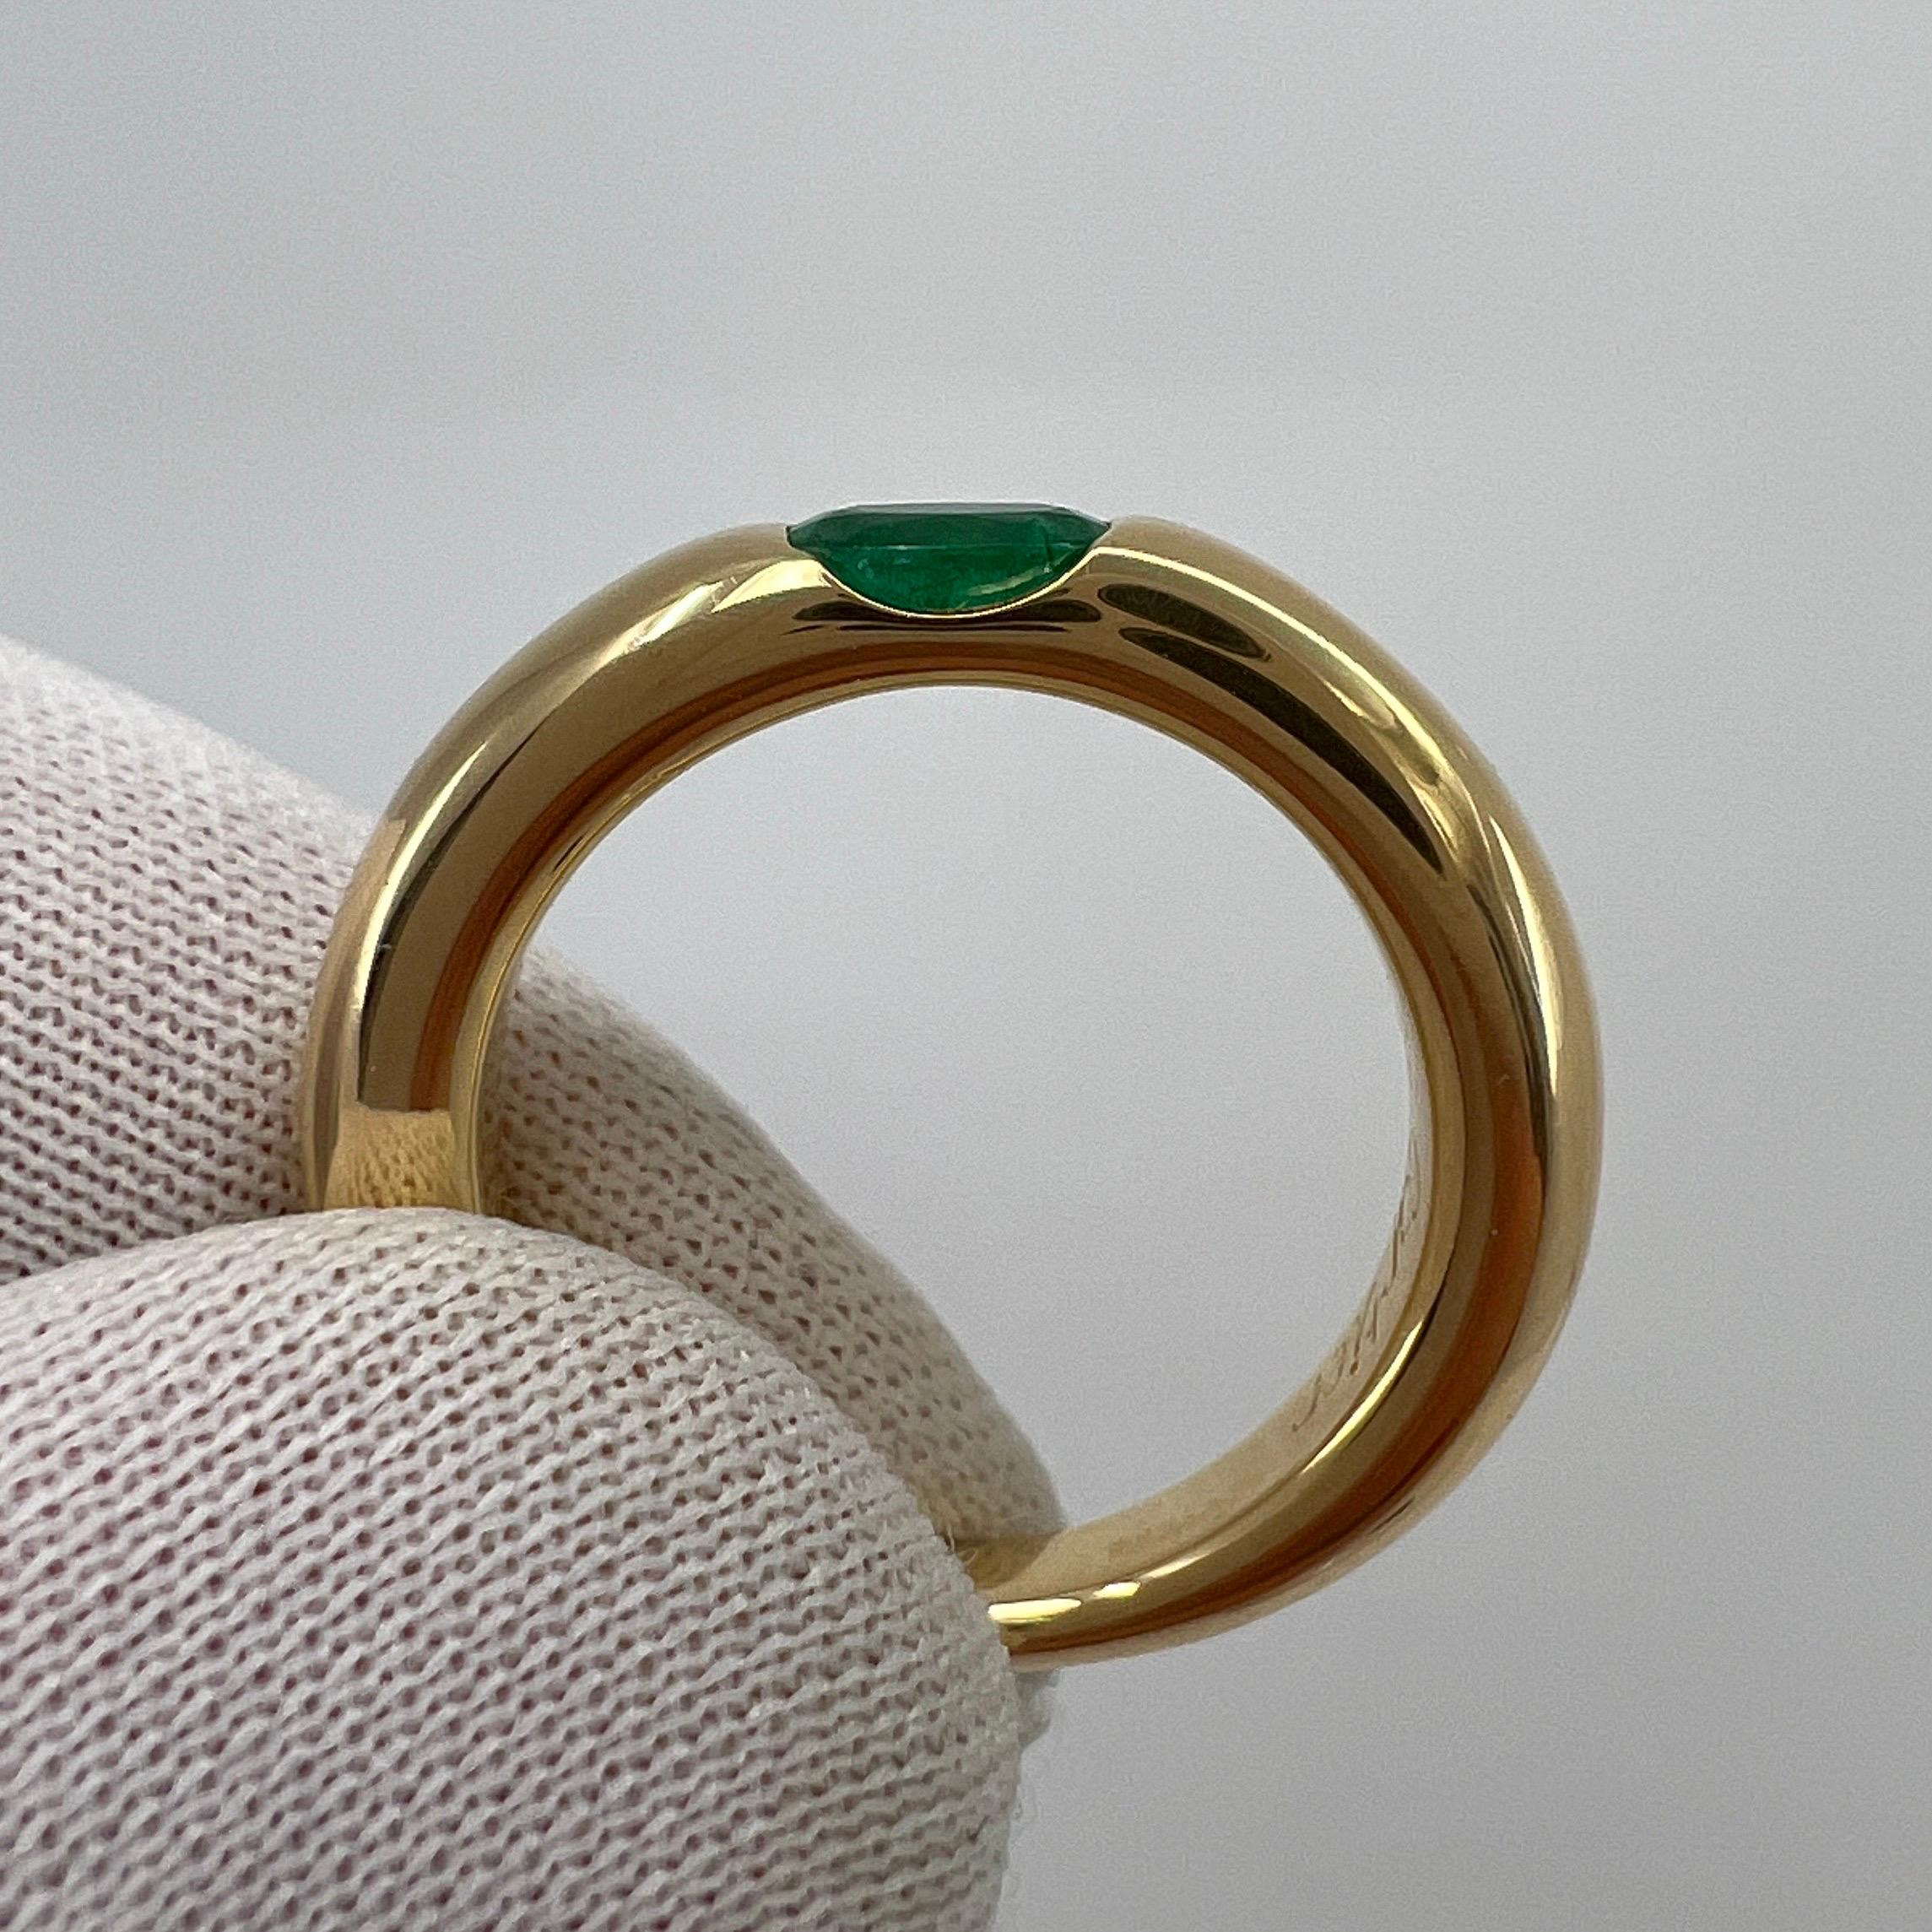 Vintage Cartier Emerald Vivid Green Ellipse 18k Yellow Gold Solitaire Ring 52 6 5